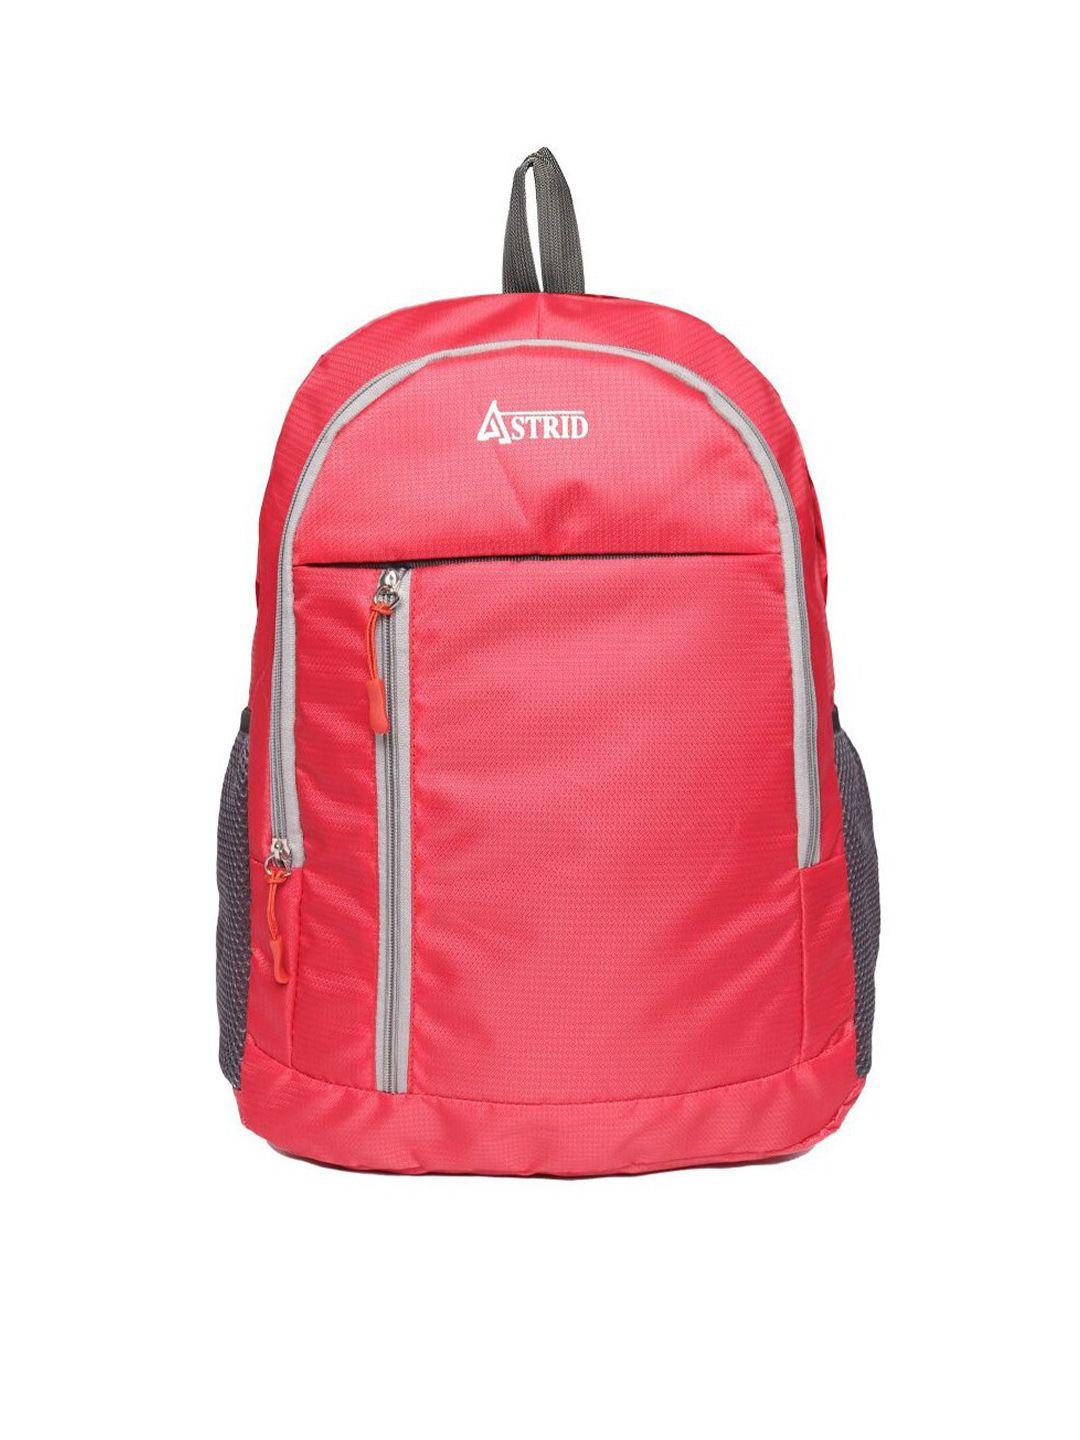 astrid men multicompartment backpack